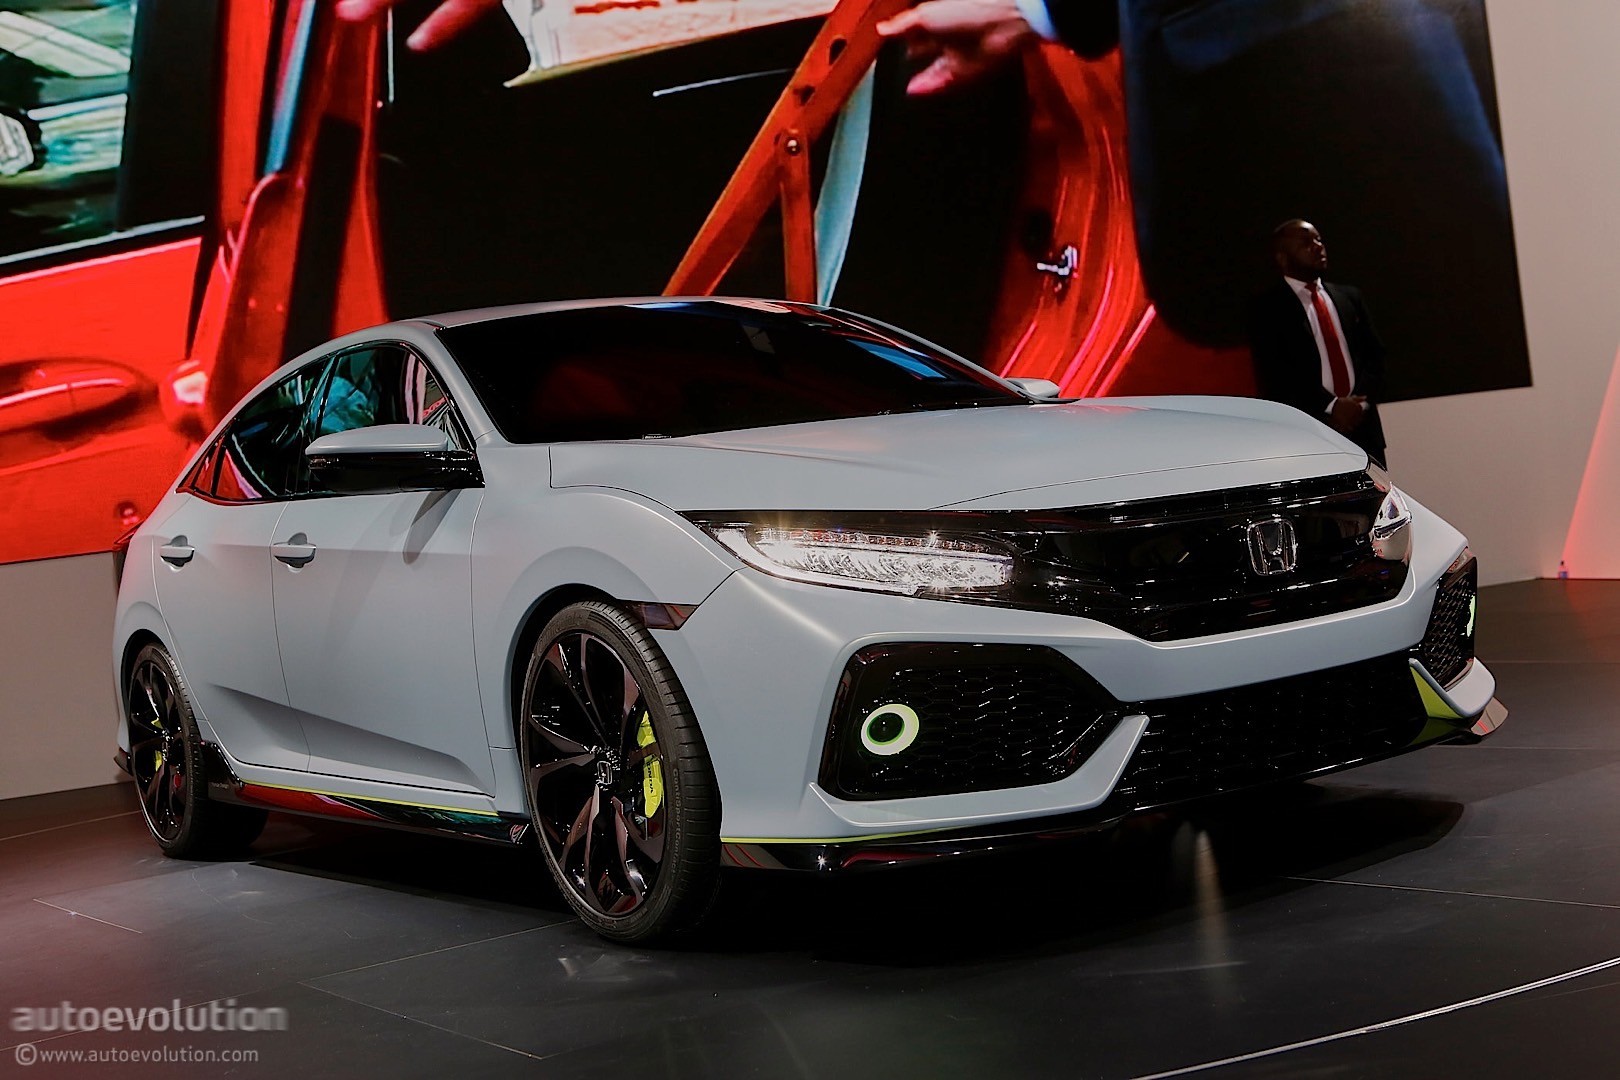 honda-civic-hatchback-coming-to-new-york-civic-si-and-new-type-r-in-2017_8.jpg